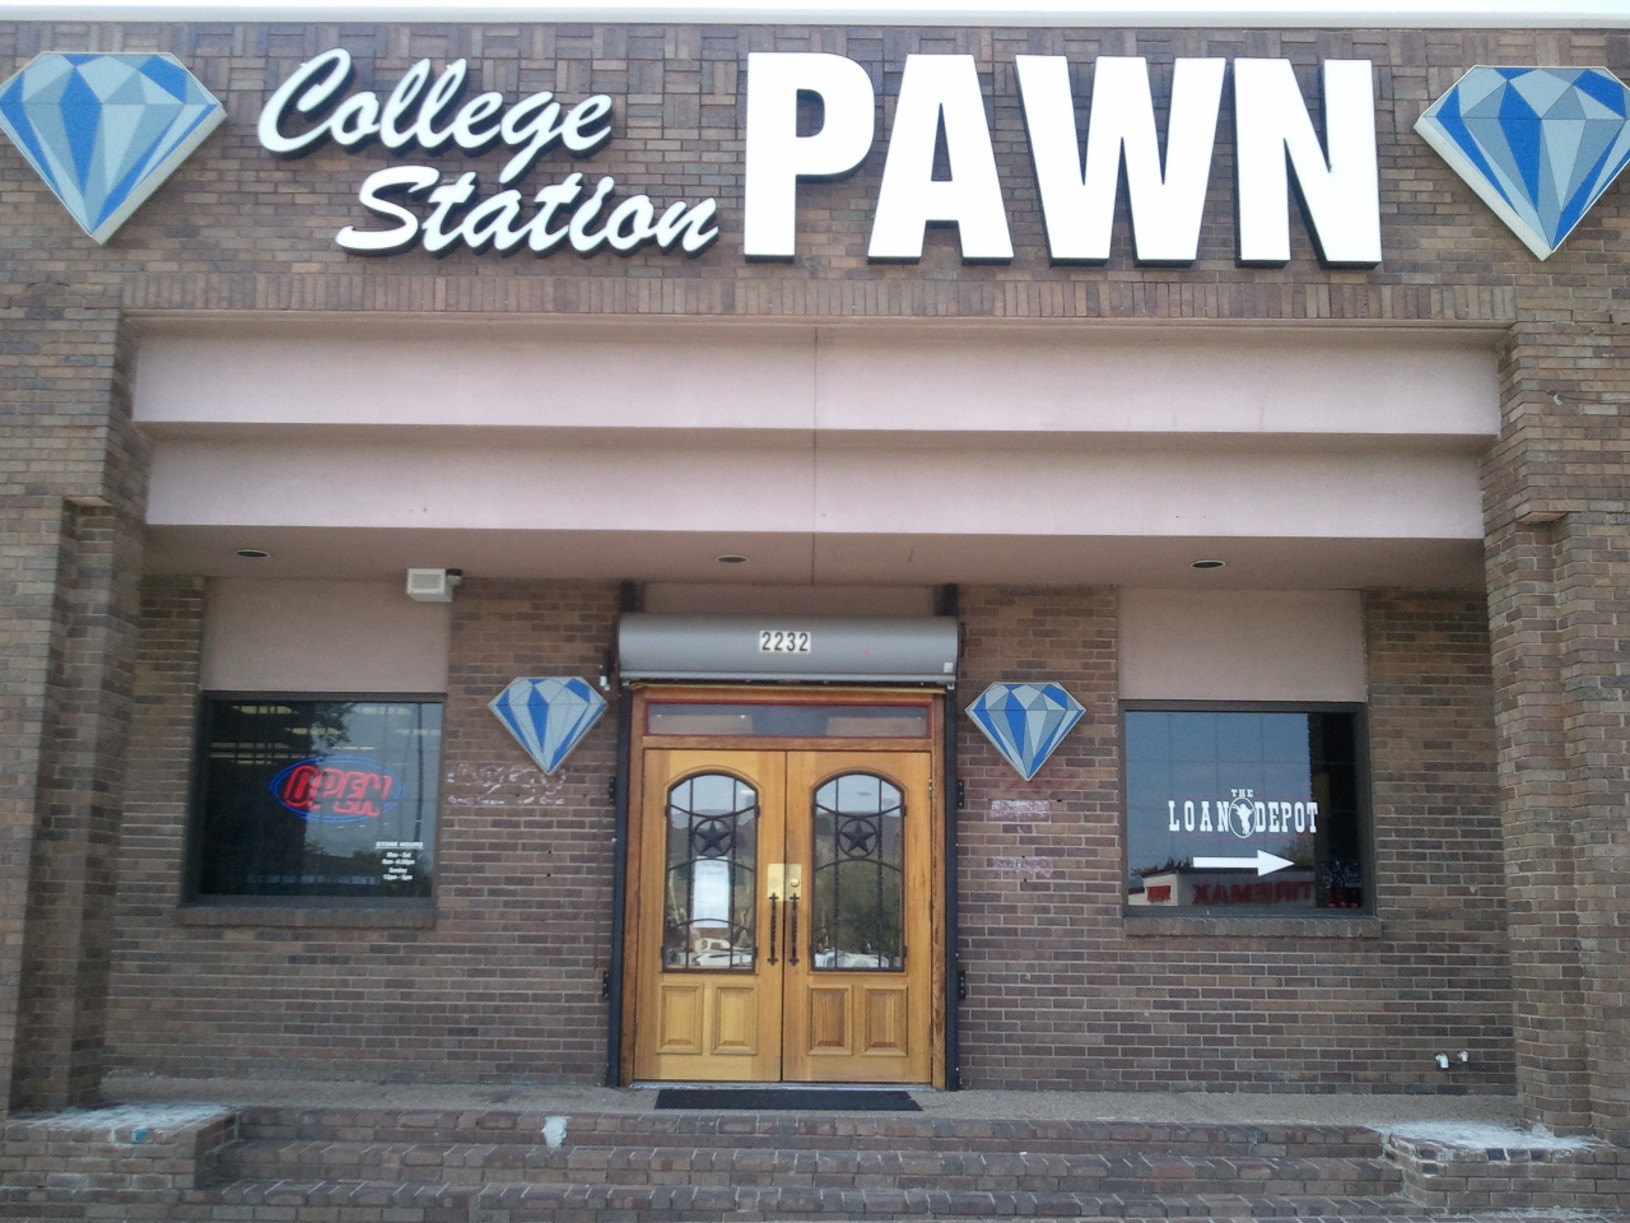 College Station Pawn